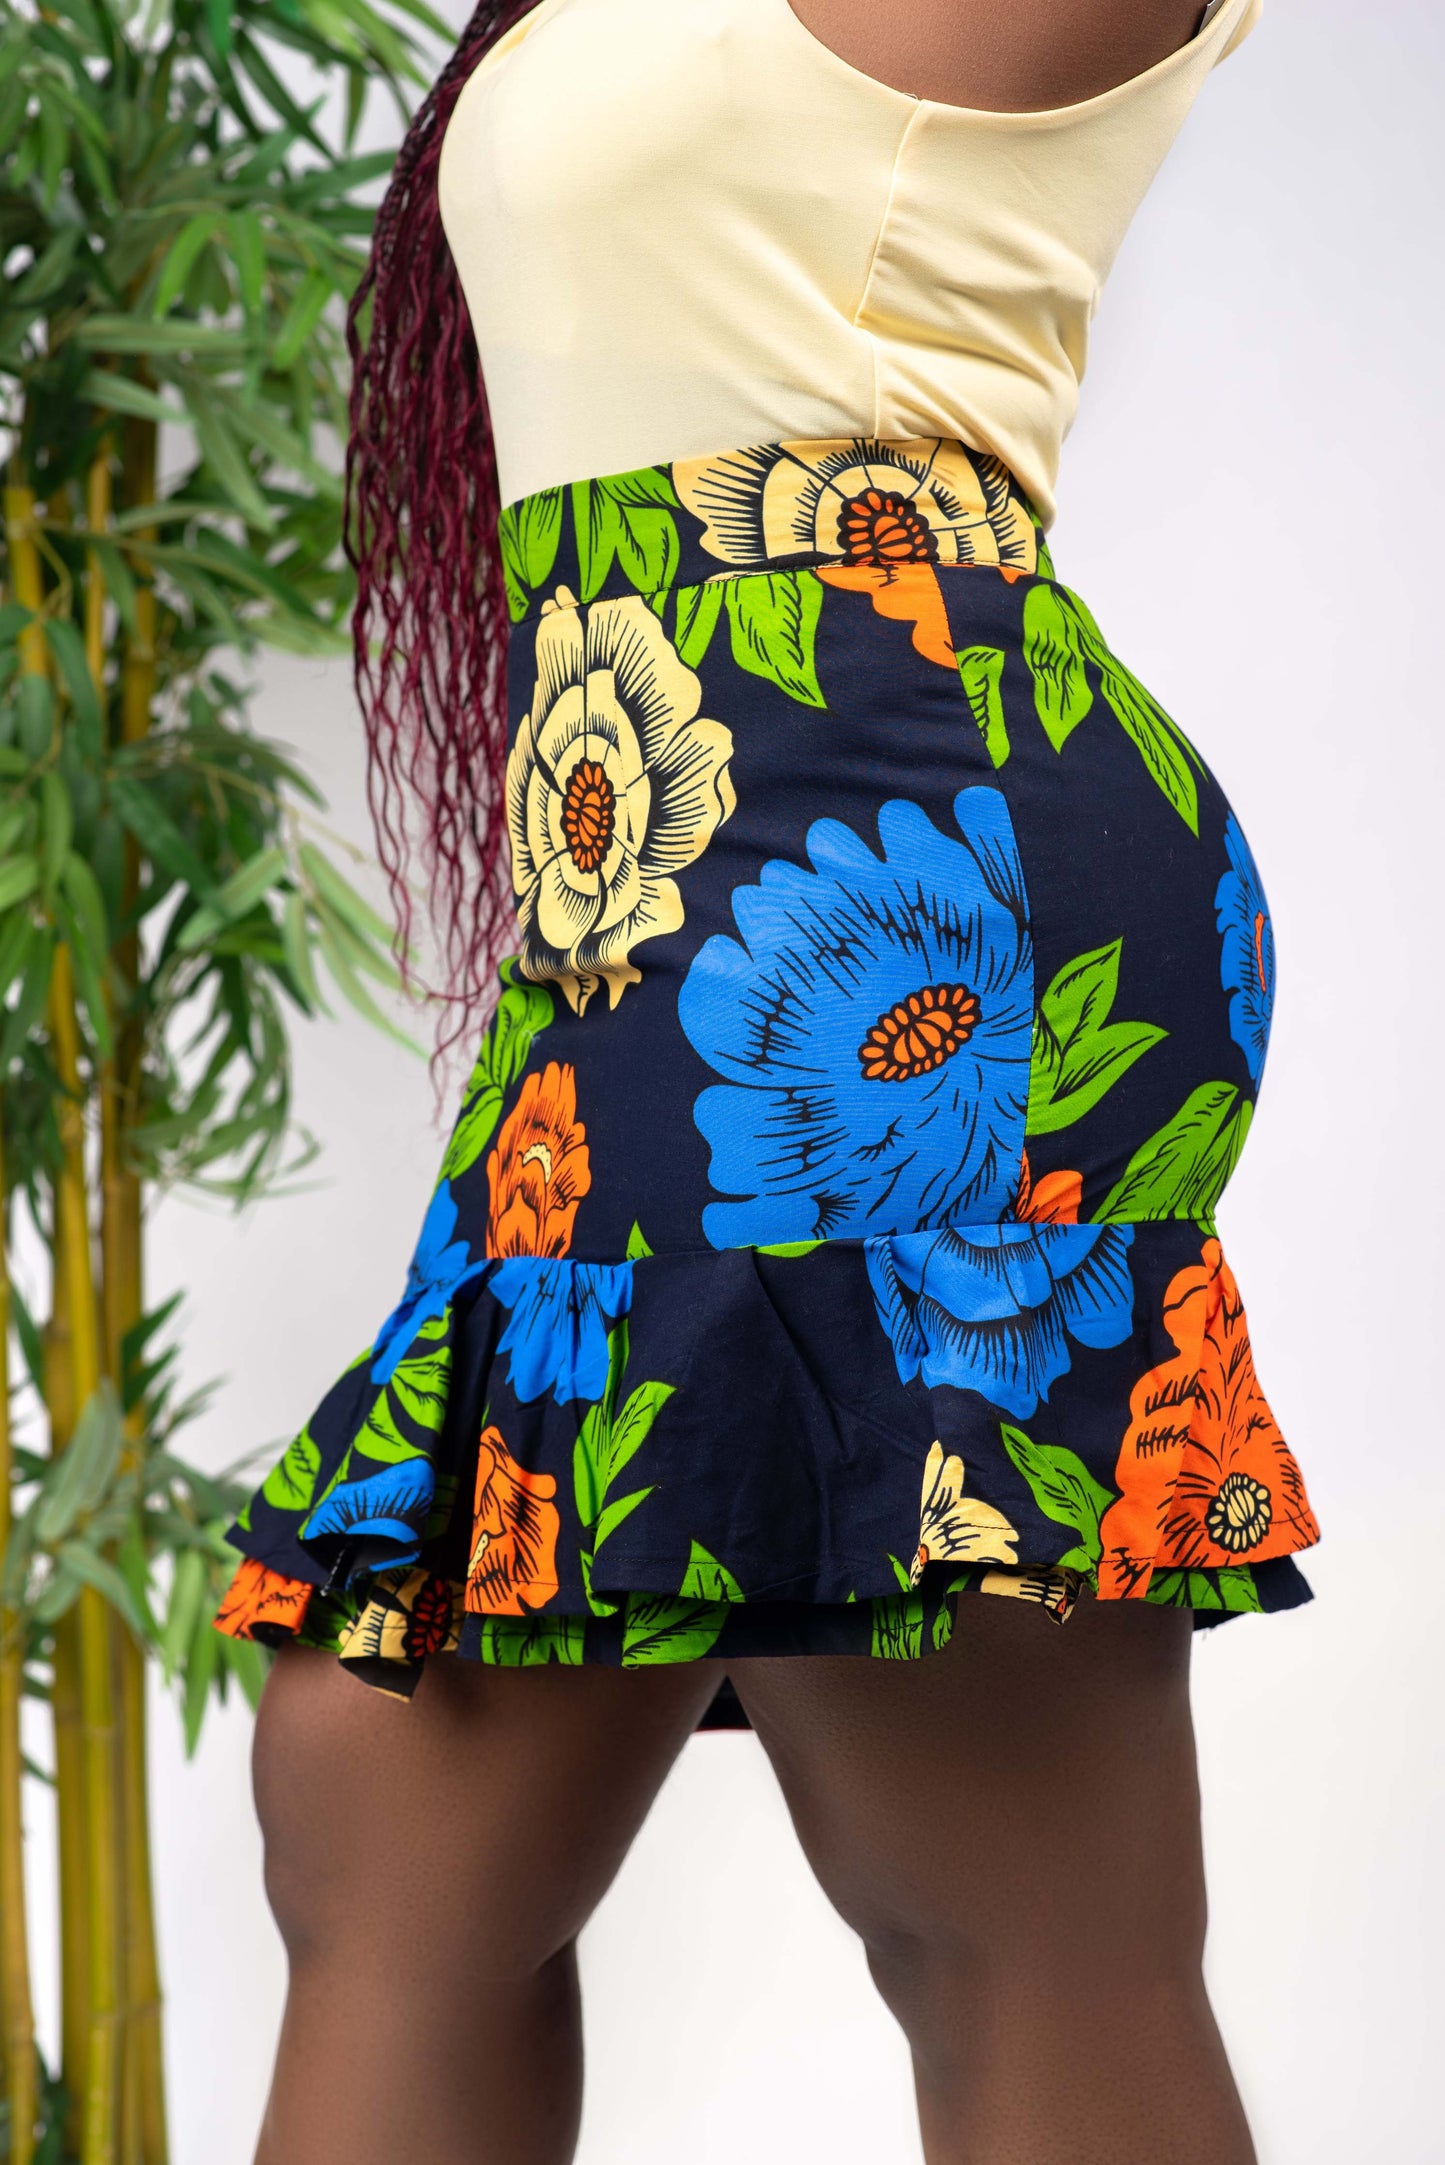 This African print skirt is Asymmetrical and features ruffles at the bottom. The asymmetrical hemline adds an element of interest, and the ruffles are fun and flirty. This skirt is perfect for women who want to stand out and be unique. Skirt is named after the Igbo ethnic group (from Nigeria) dance style; Atilogwu. Ankara skirt